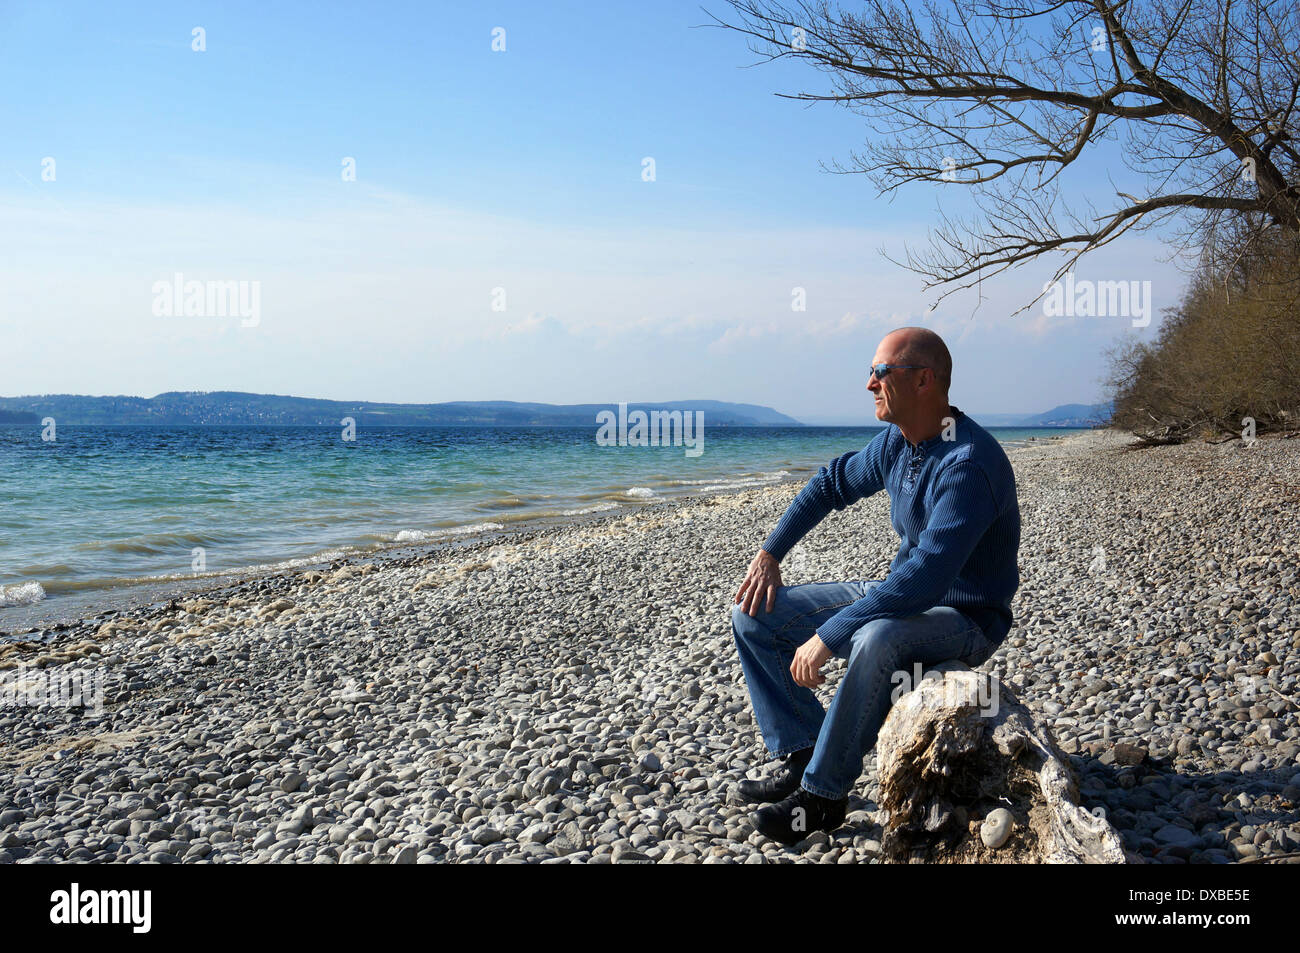 A 50 plus man enjoying life during a walk in spring at the beautiful lake of constance Stock Photo